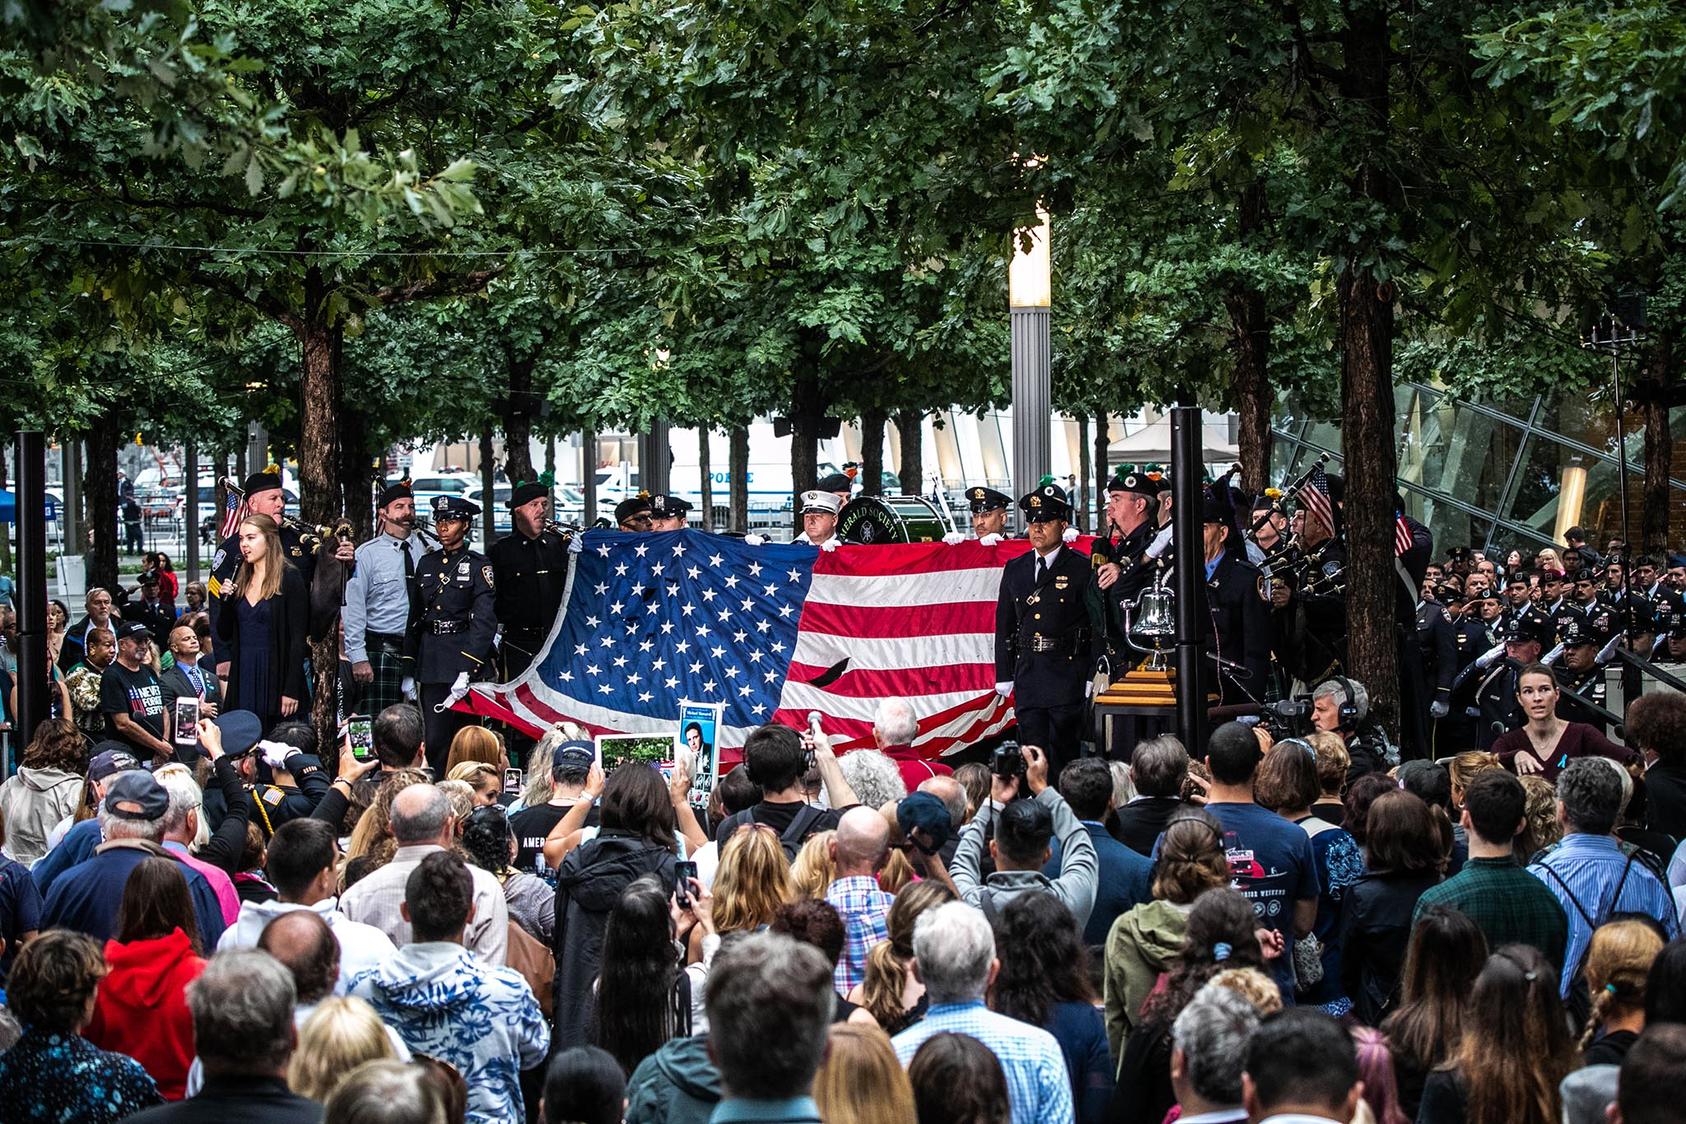 First responders hold an American flag that once flew over the World Trade Center towers, during the 17th anniversary of the Sept. 11 terrorist attacks, in New York, Sept. 11, 2018. (Jeenah Moon/The New York Times)